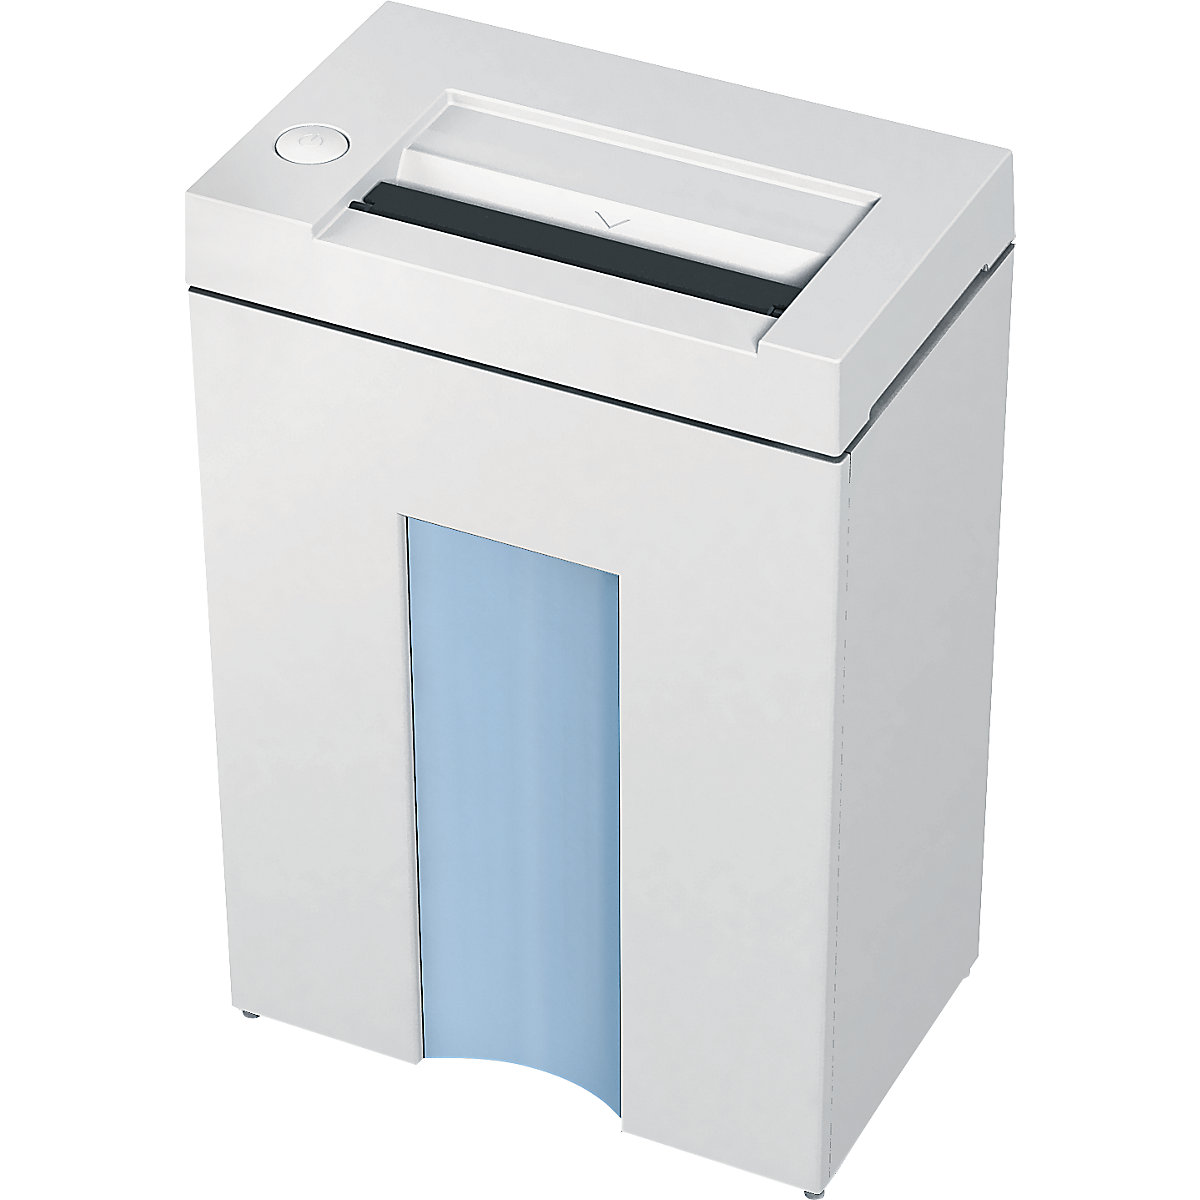 Document shredder 2265 – IDEAL, collection capacity 20 l, particles, 2 x 15 mm-4